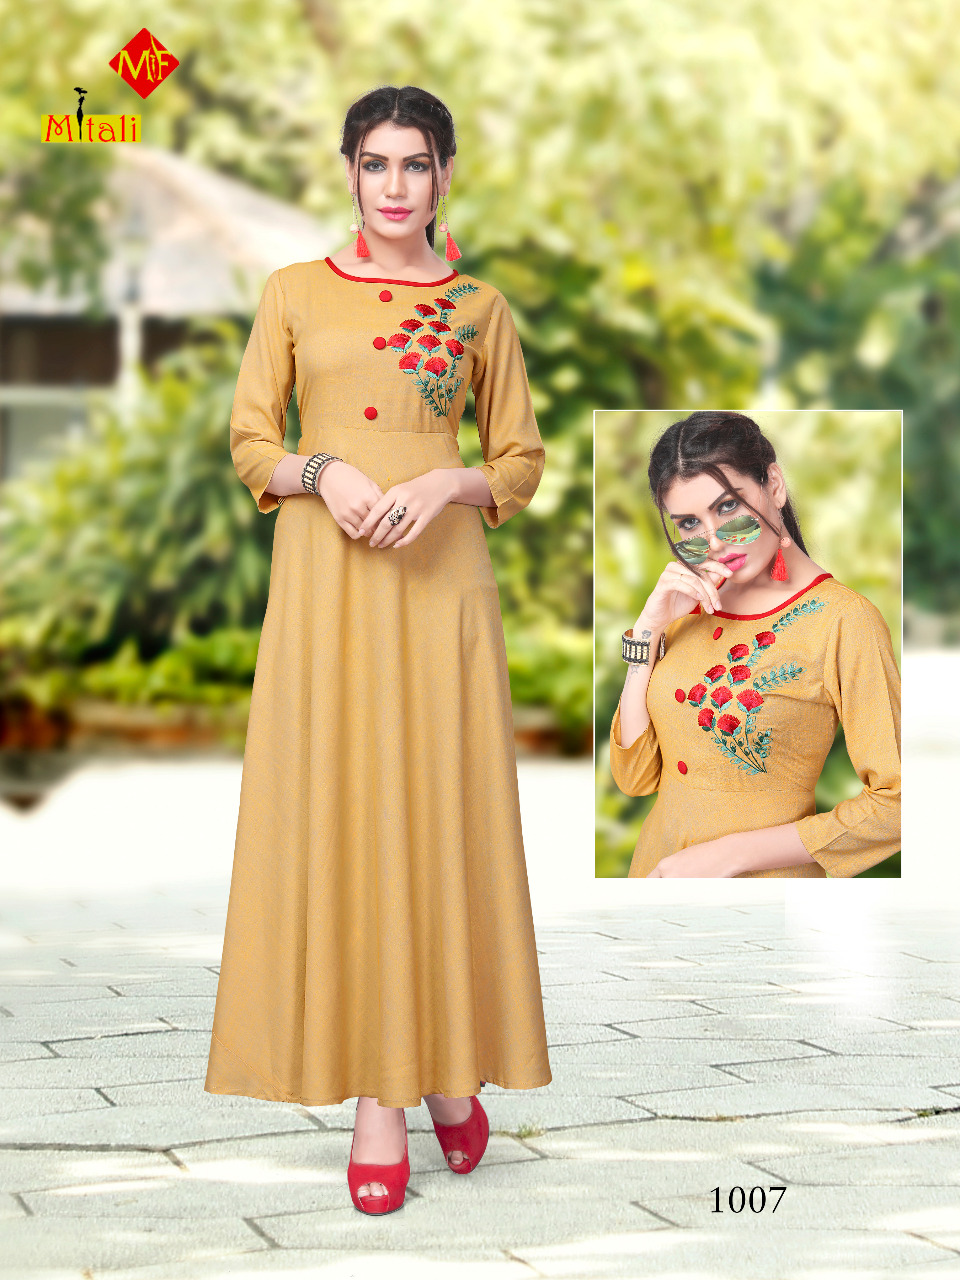 Mitali fashion presents mailstone casual fancy gown style kurtis collection